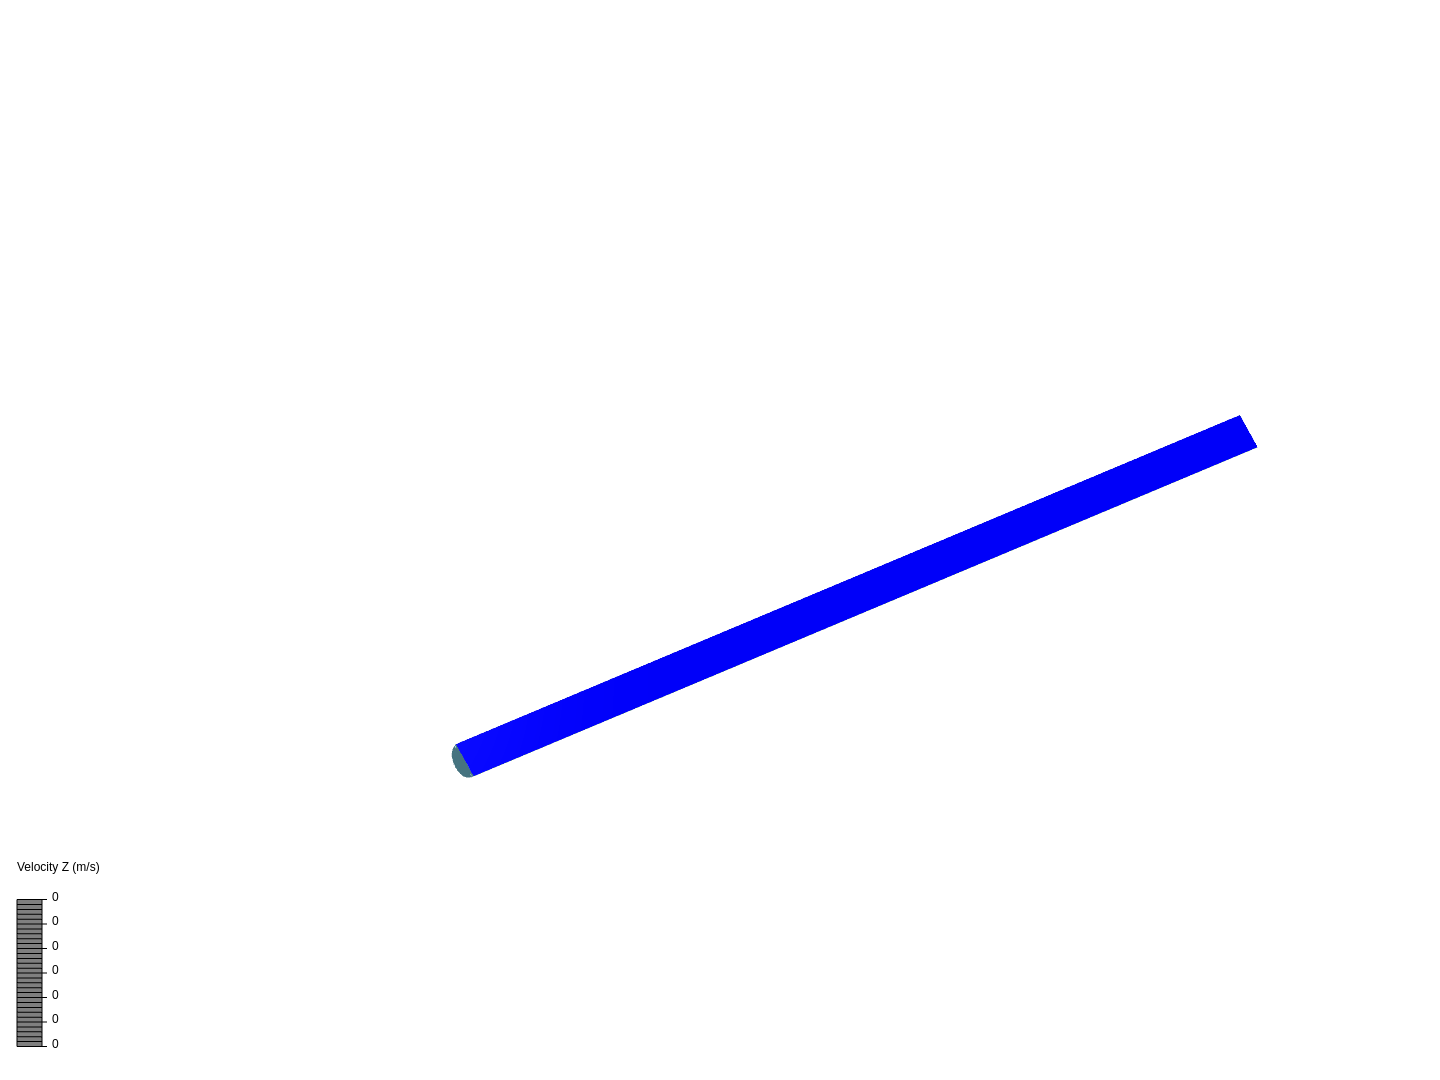 Laminar Flow in a Pipe 2 image